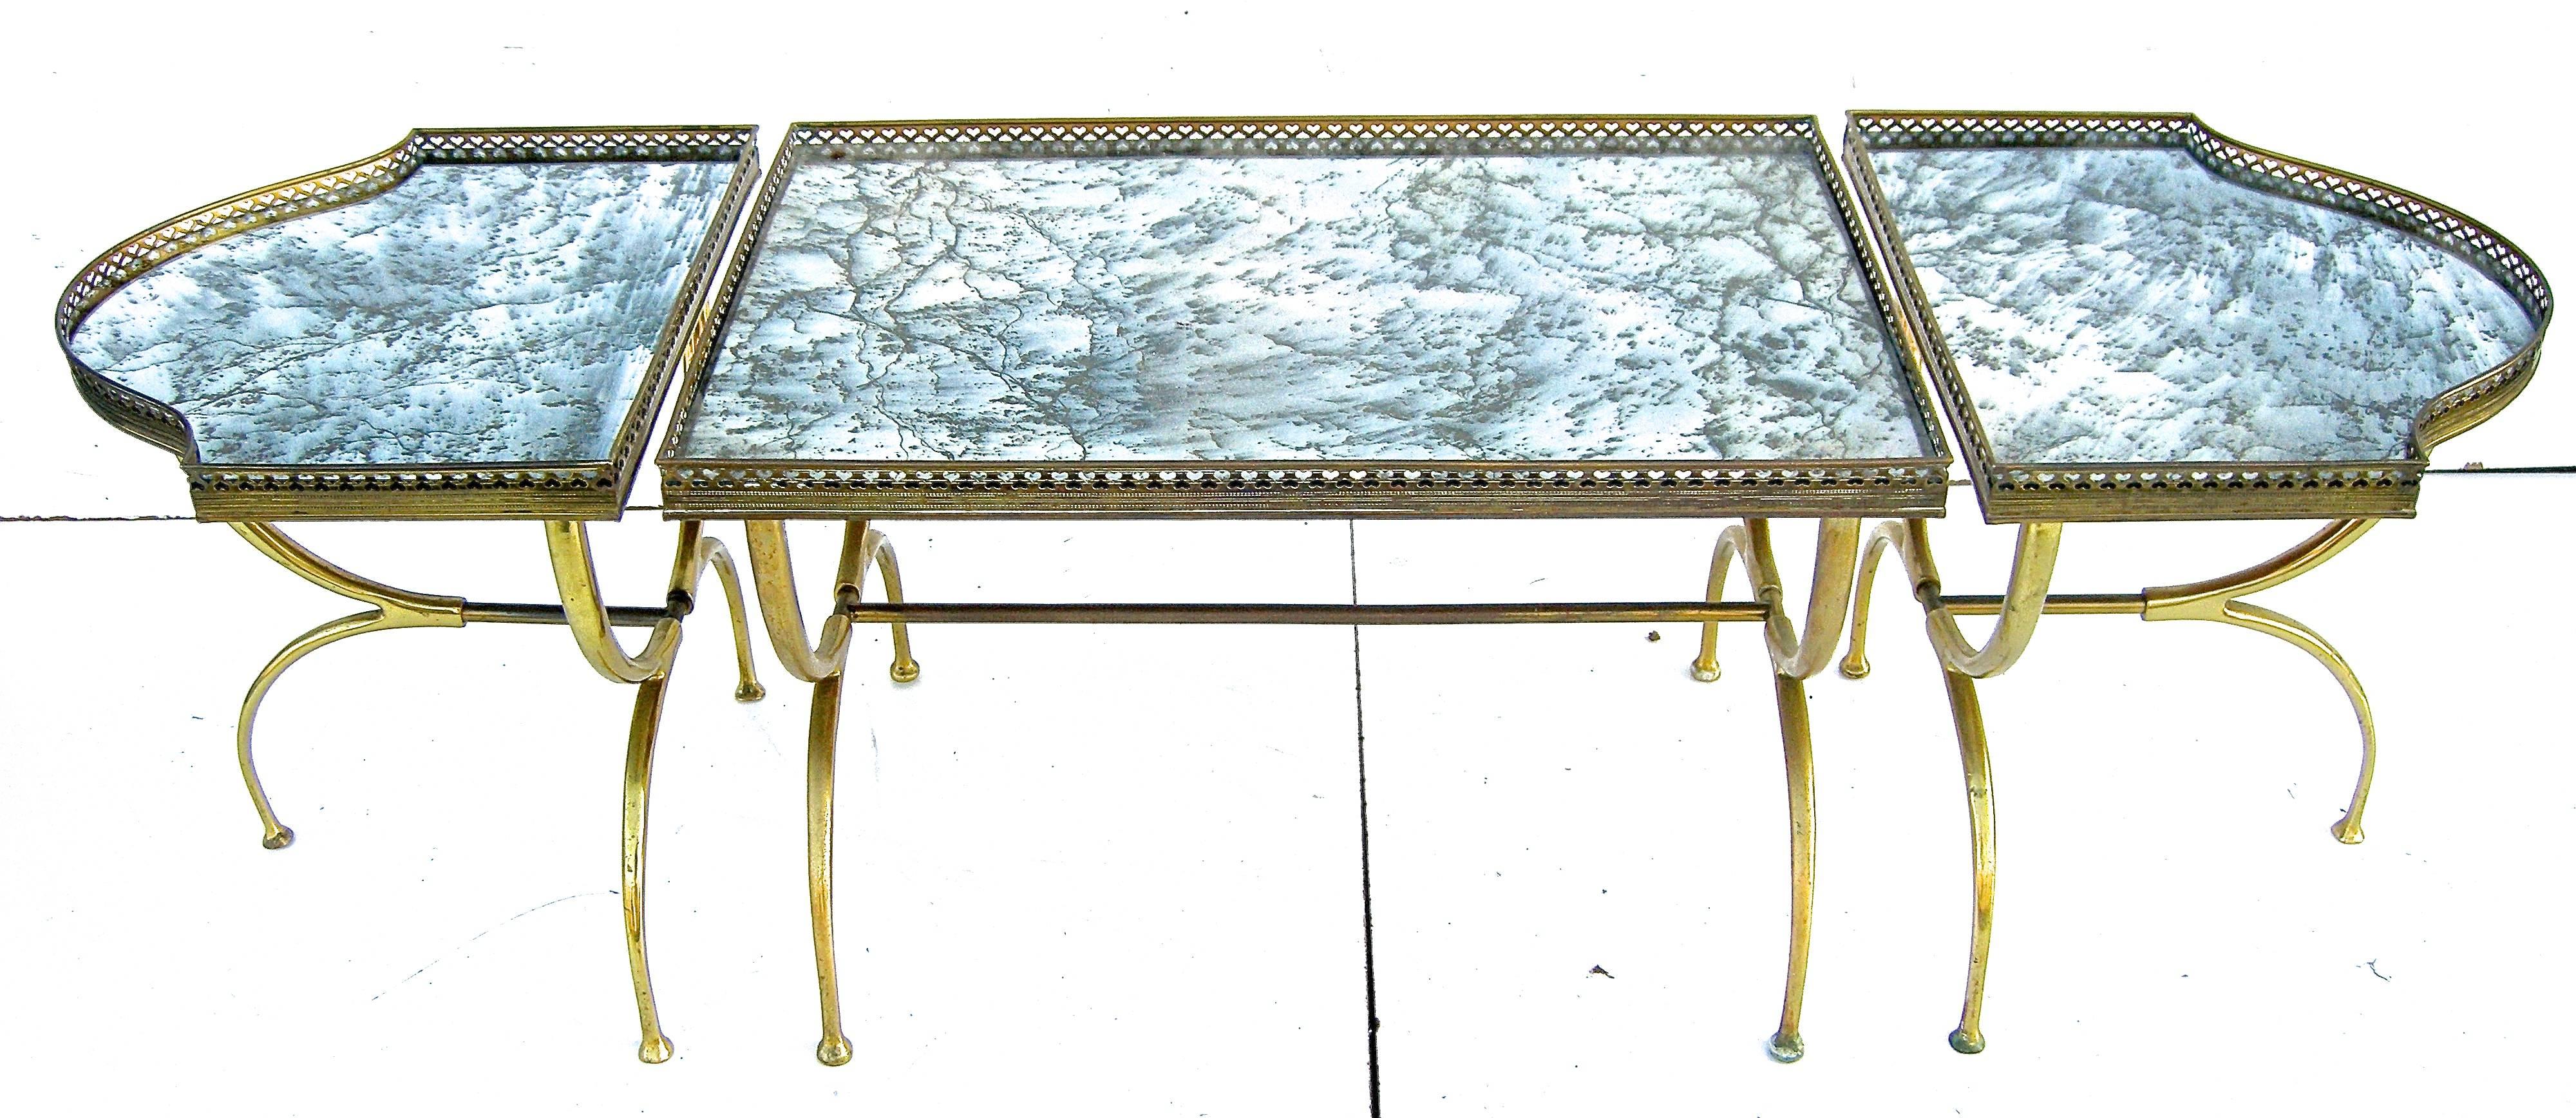 Hand-Crafted Italian Mirrored Coffee Table